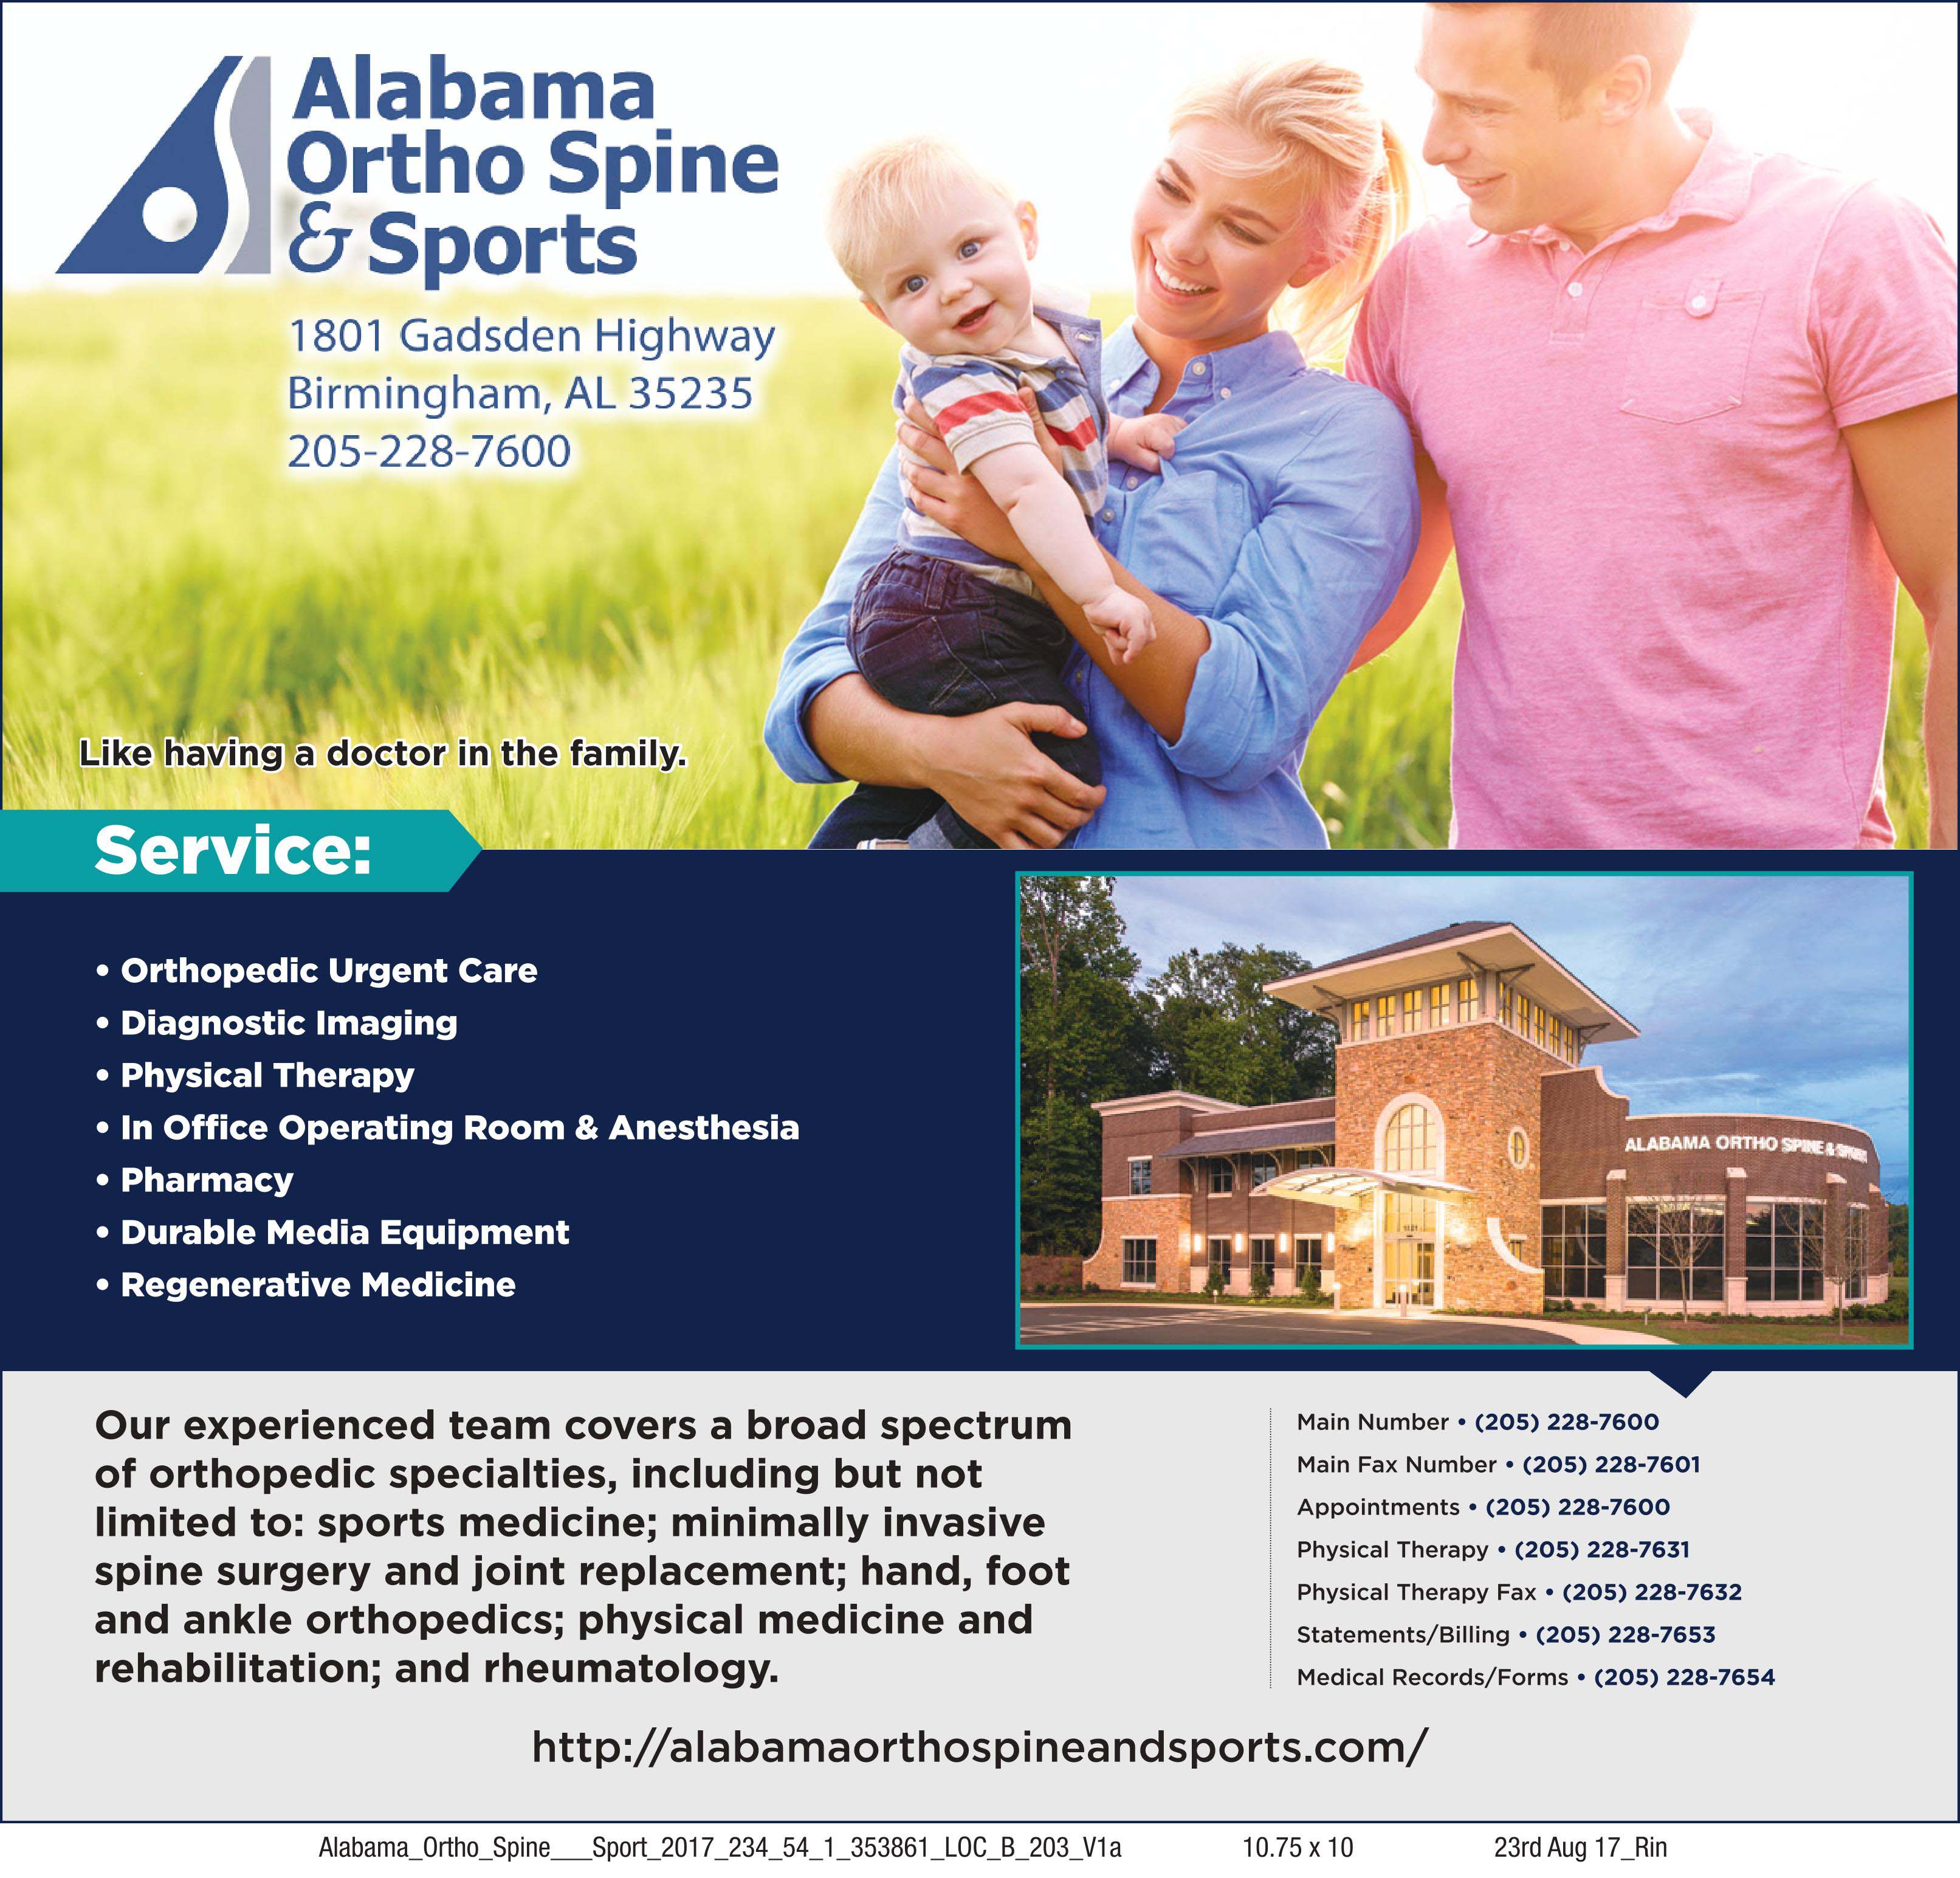 Alabama Ortho Spine & Sports committed to treating musculoskeletal conditions